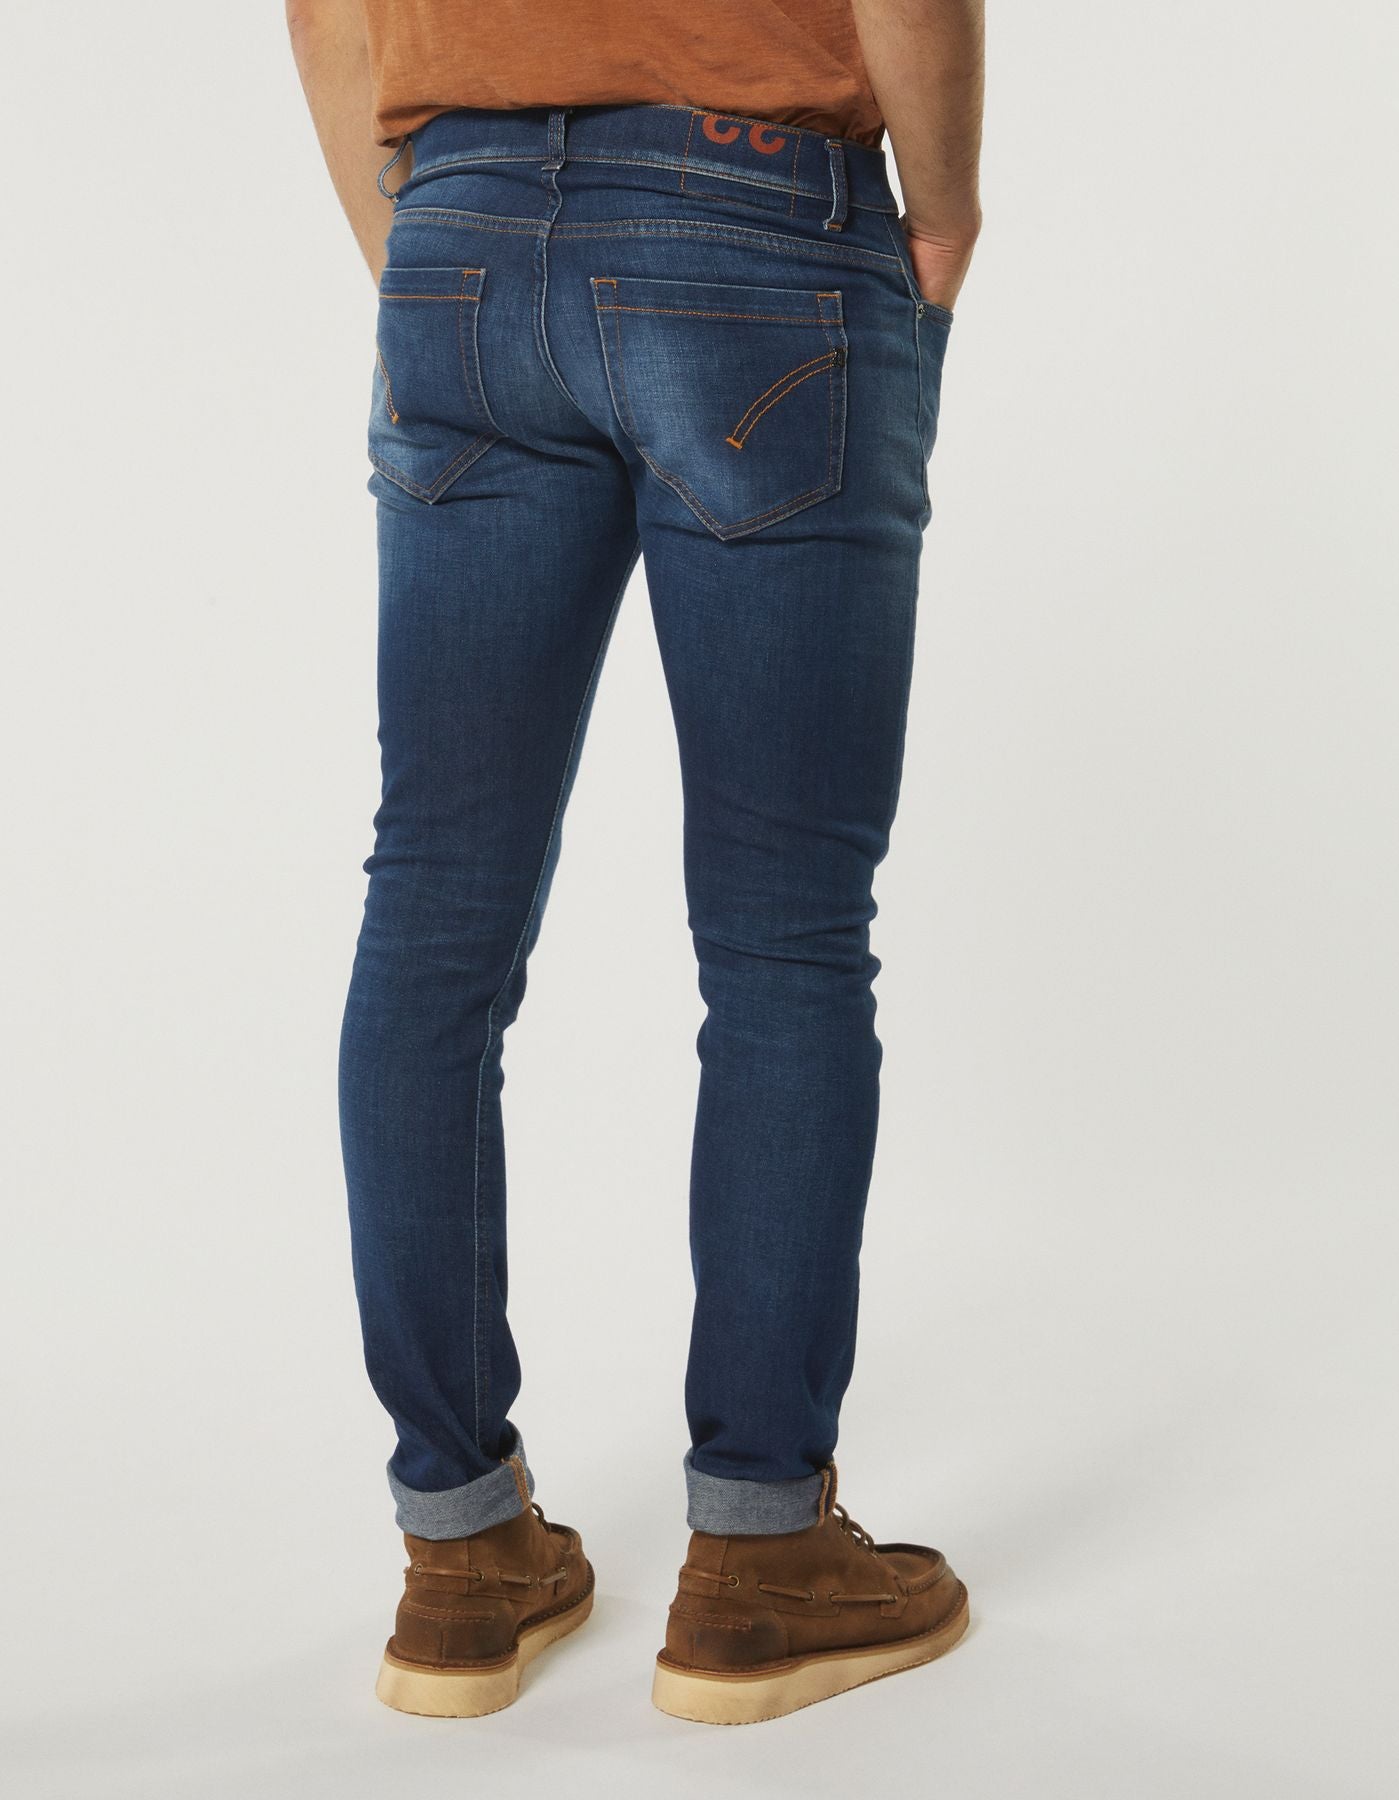 UP232 DS0145 FO4 - JEANS - DONDUP